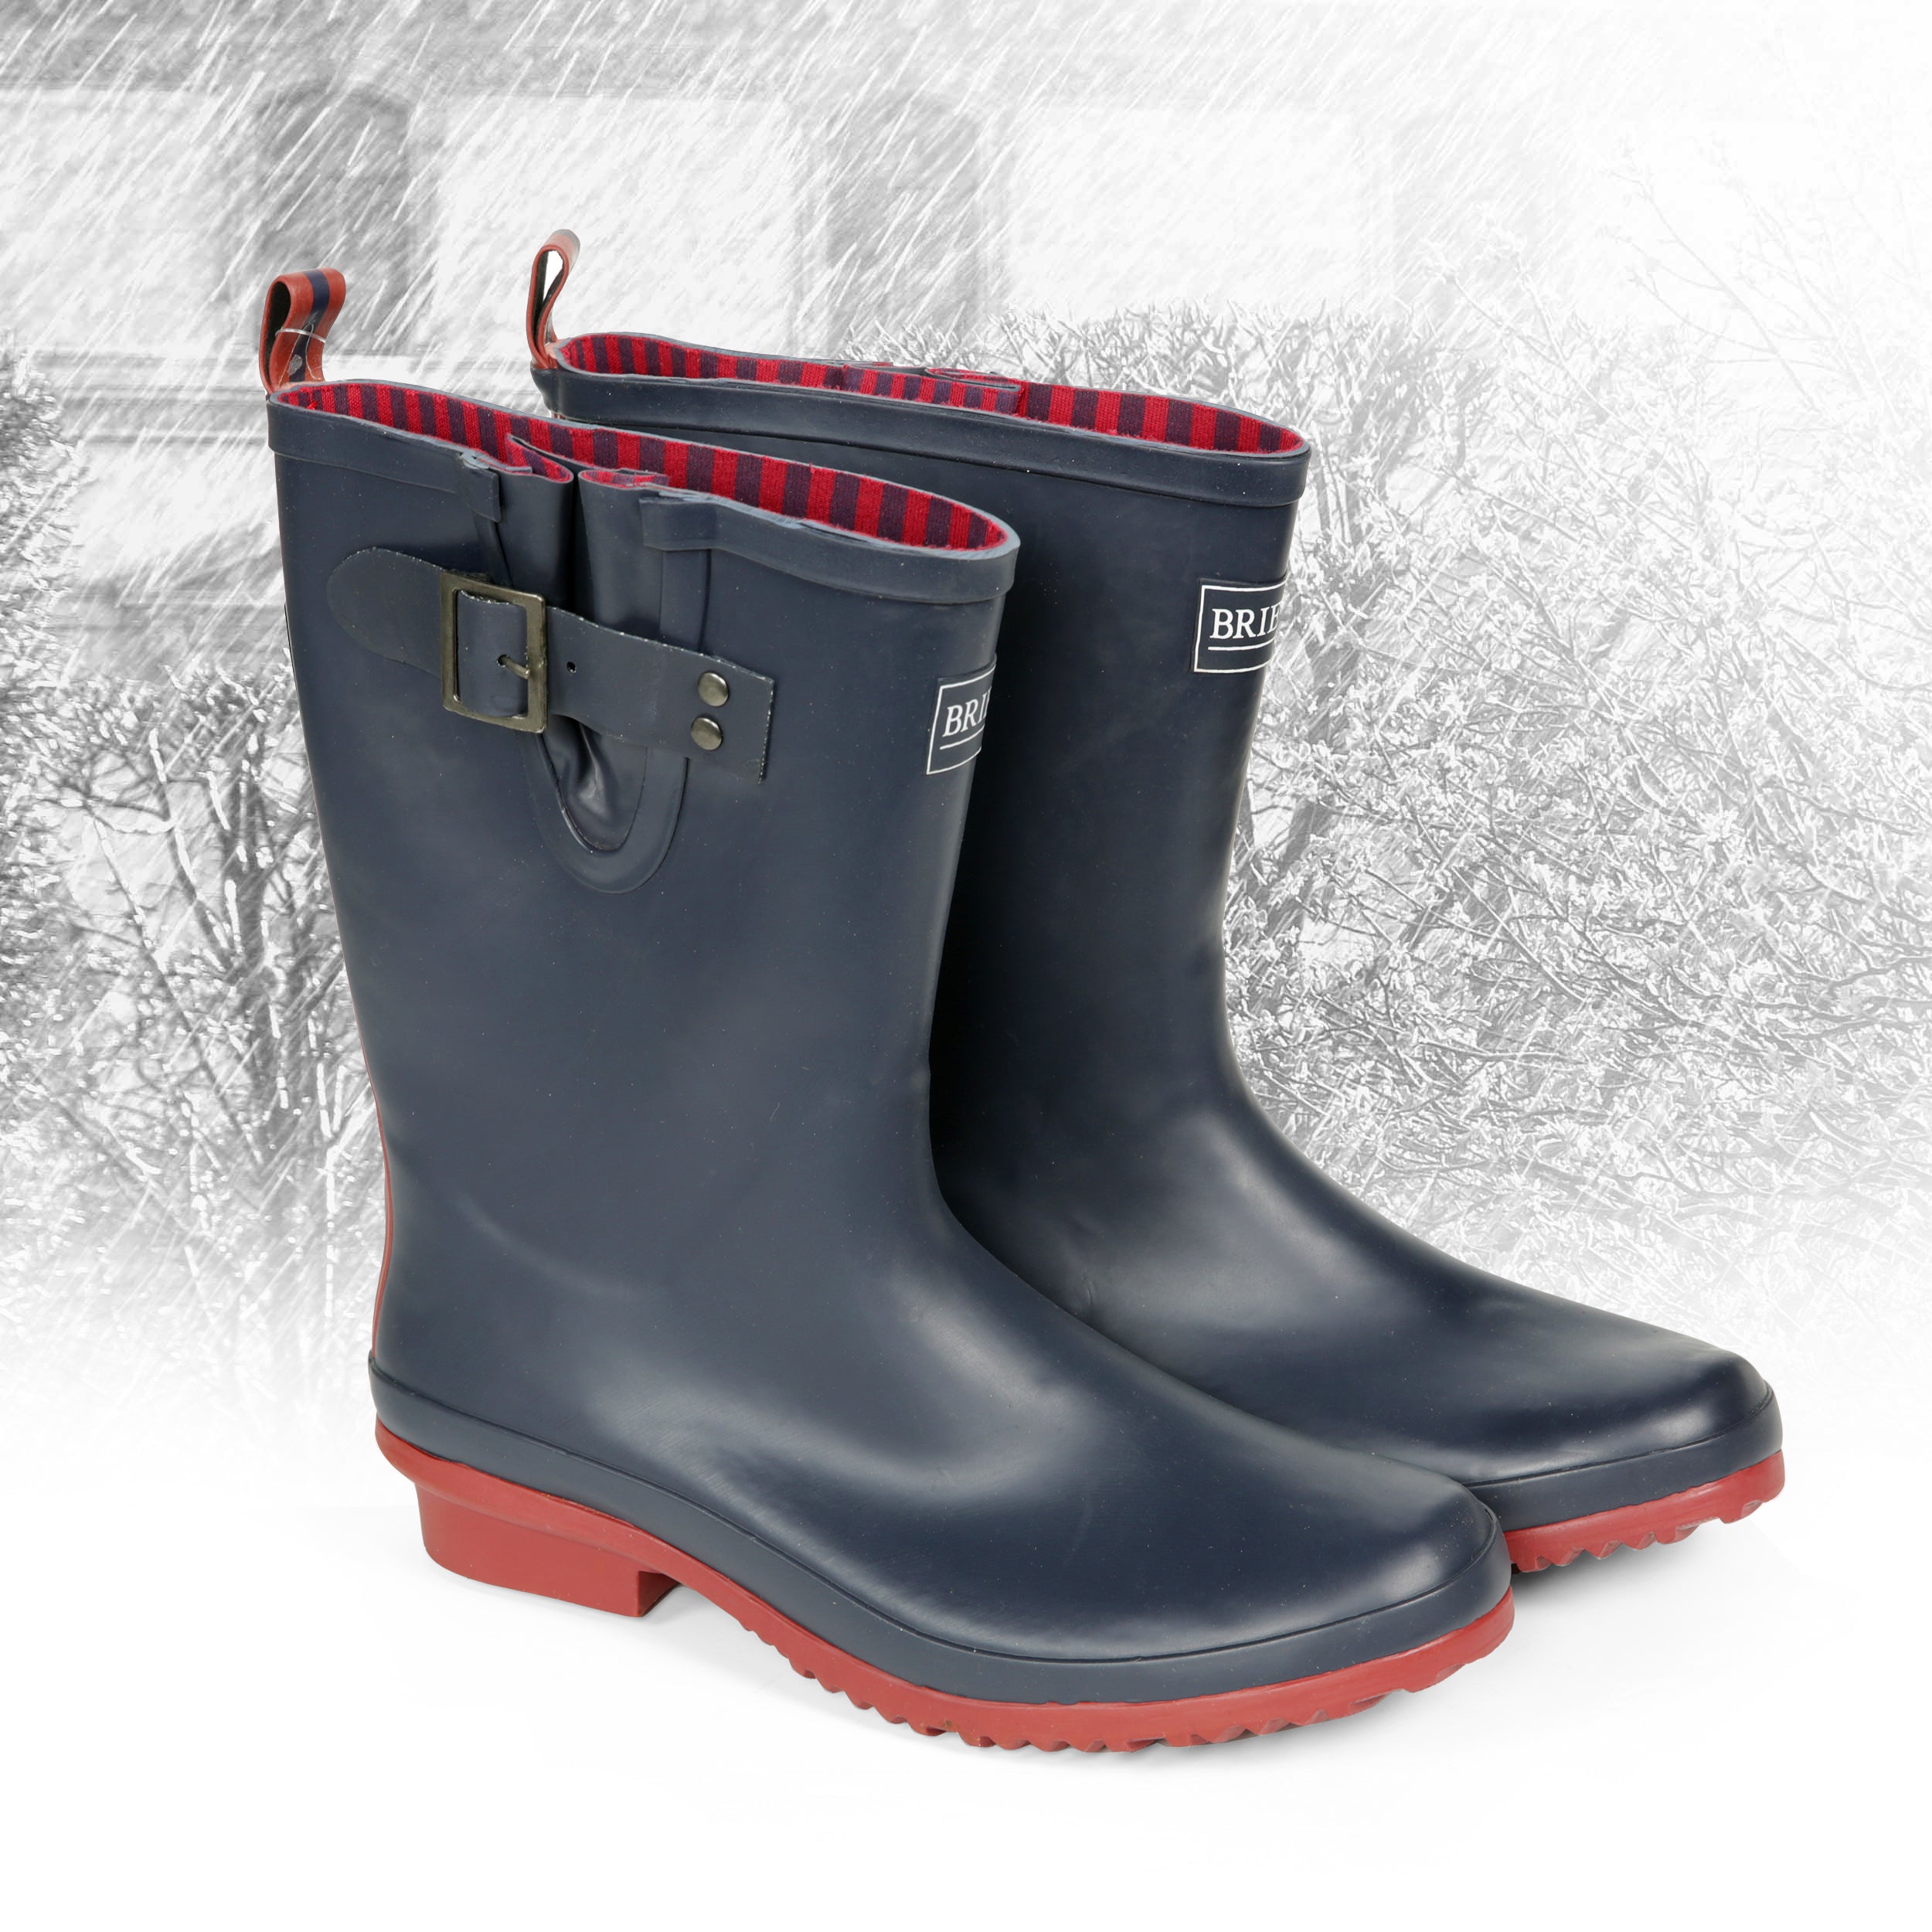 Briers Half Length Rubber Wellington Boots Navy/Red Stripe - Size 8